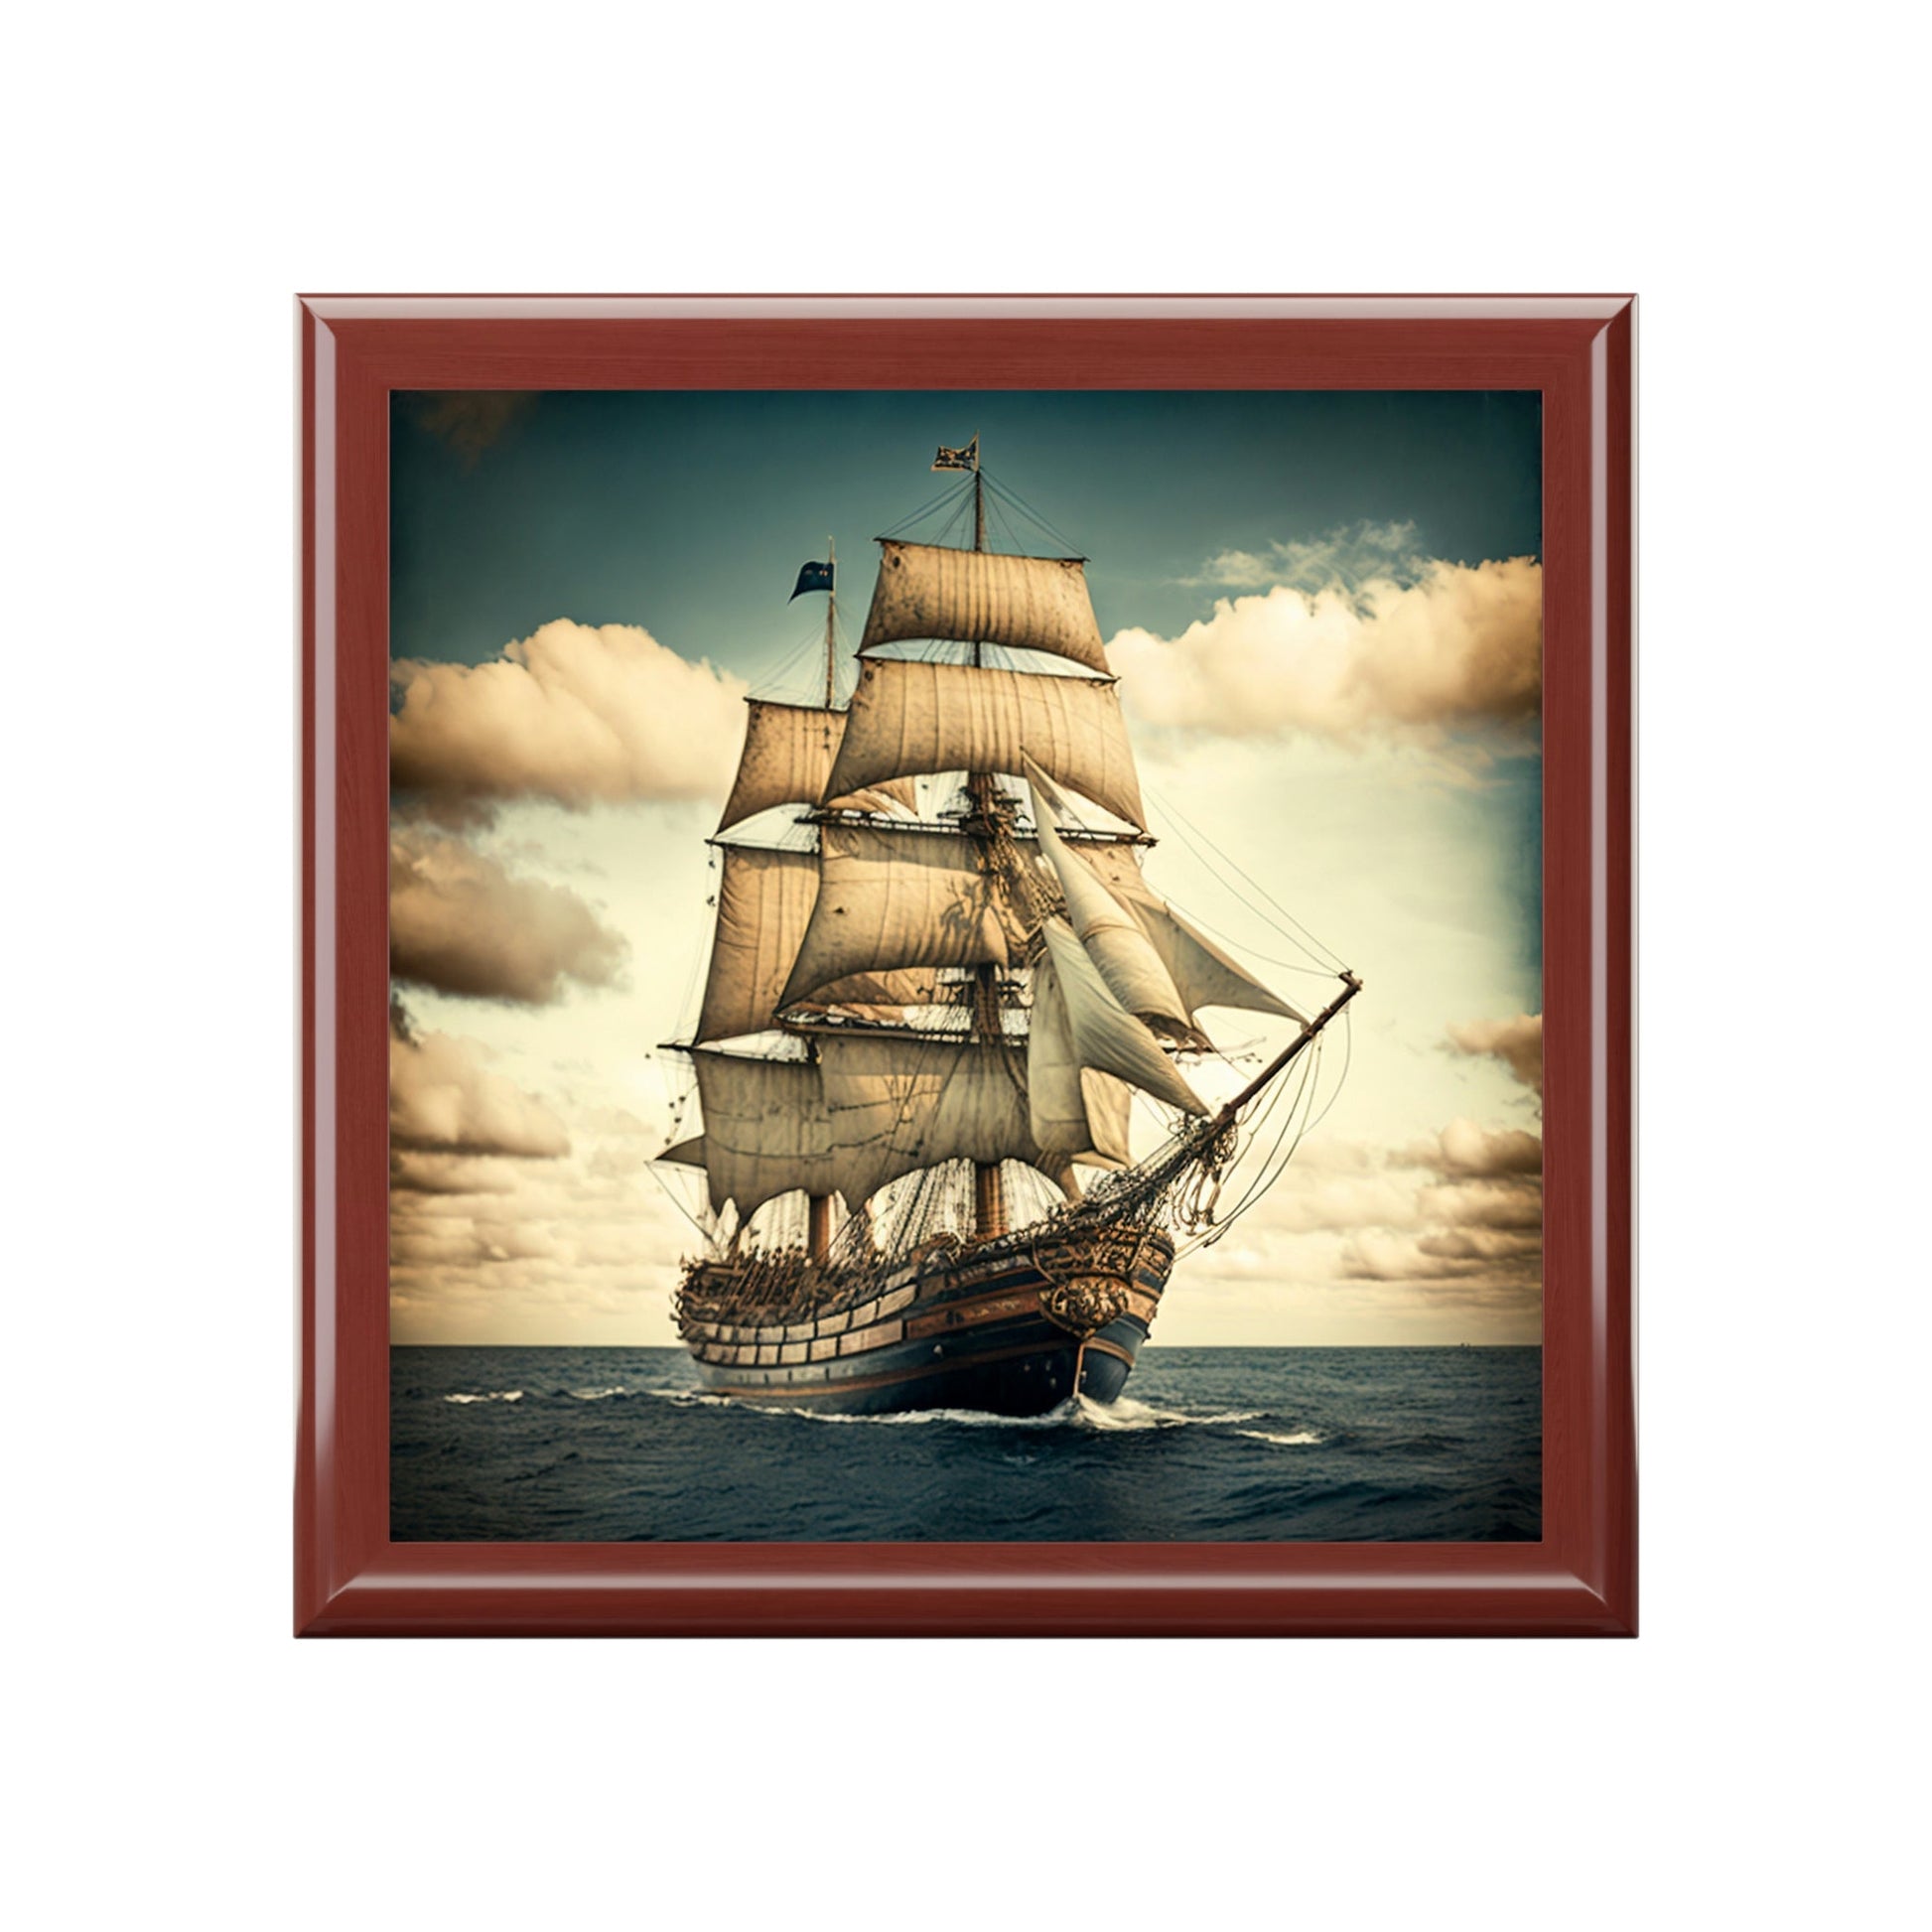 Tall Ship Wood Keepsake Jewelry Box with Ceramic Tile Cover